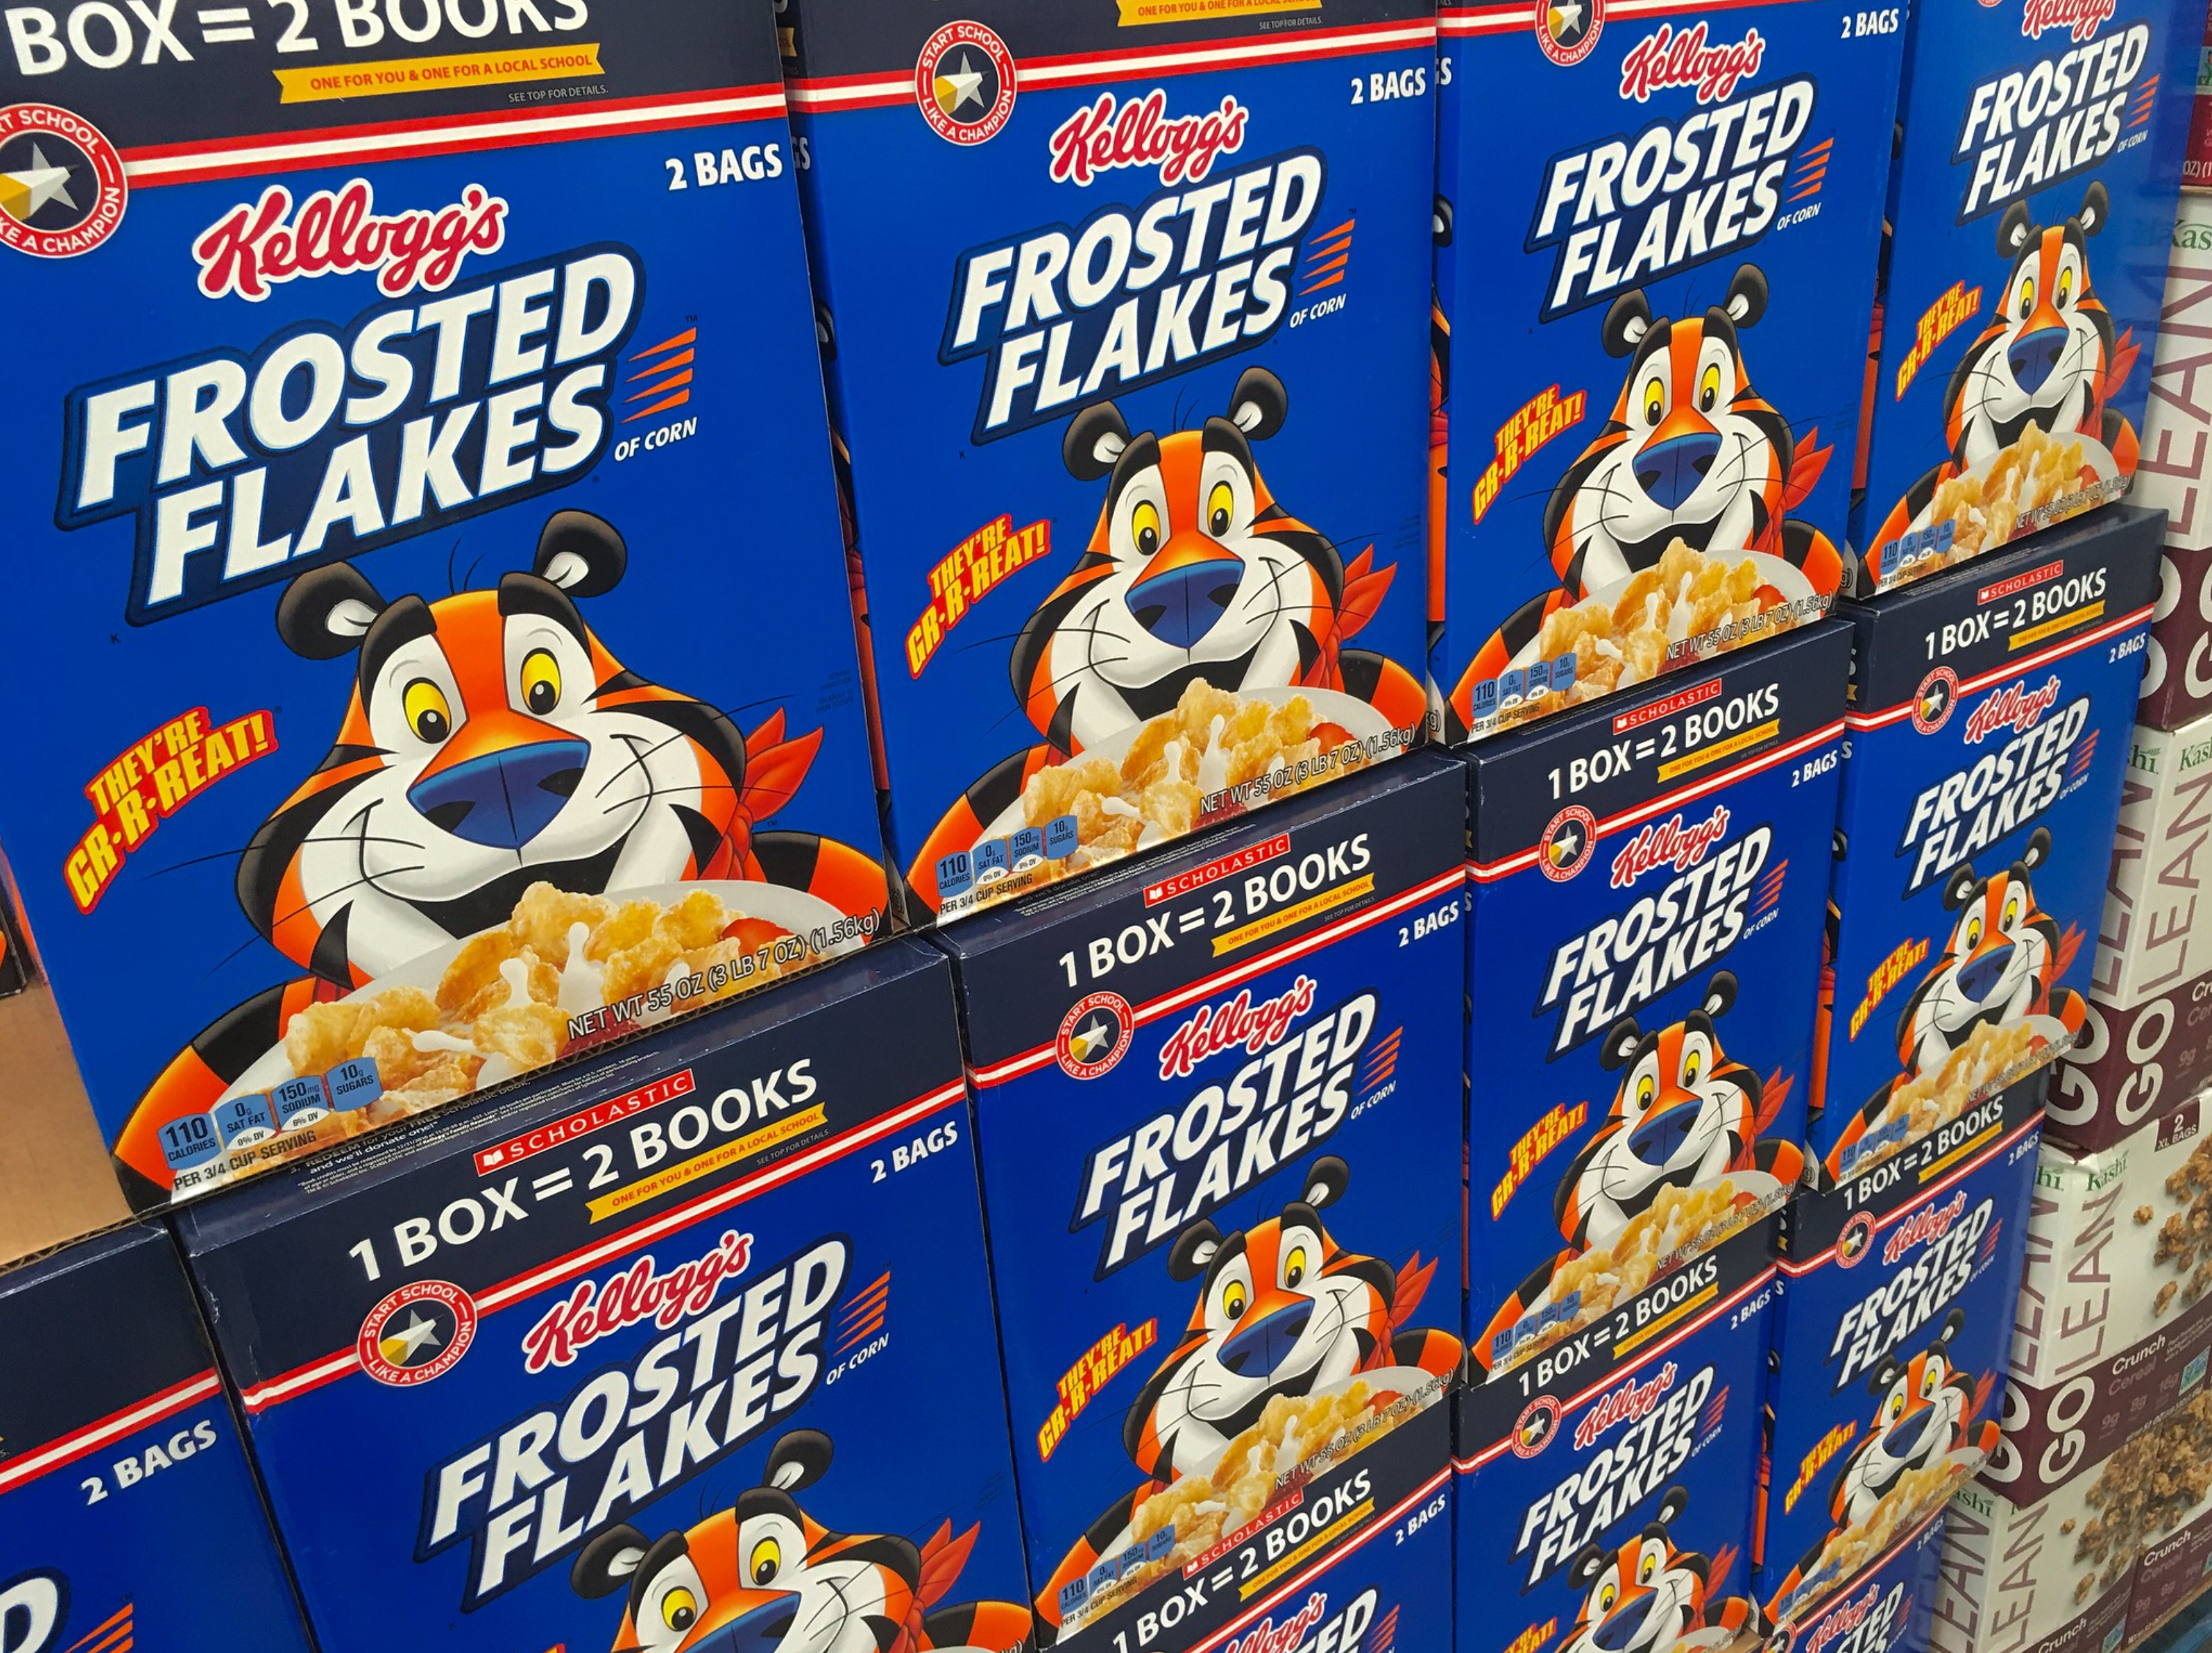 Kellogg's Frosted Flakes credit Mike Mozart (CC BY 2.0)